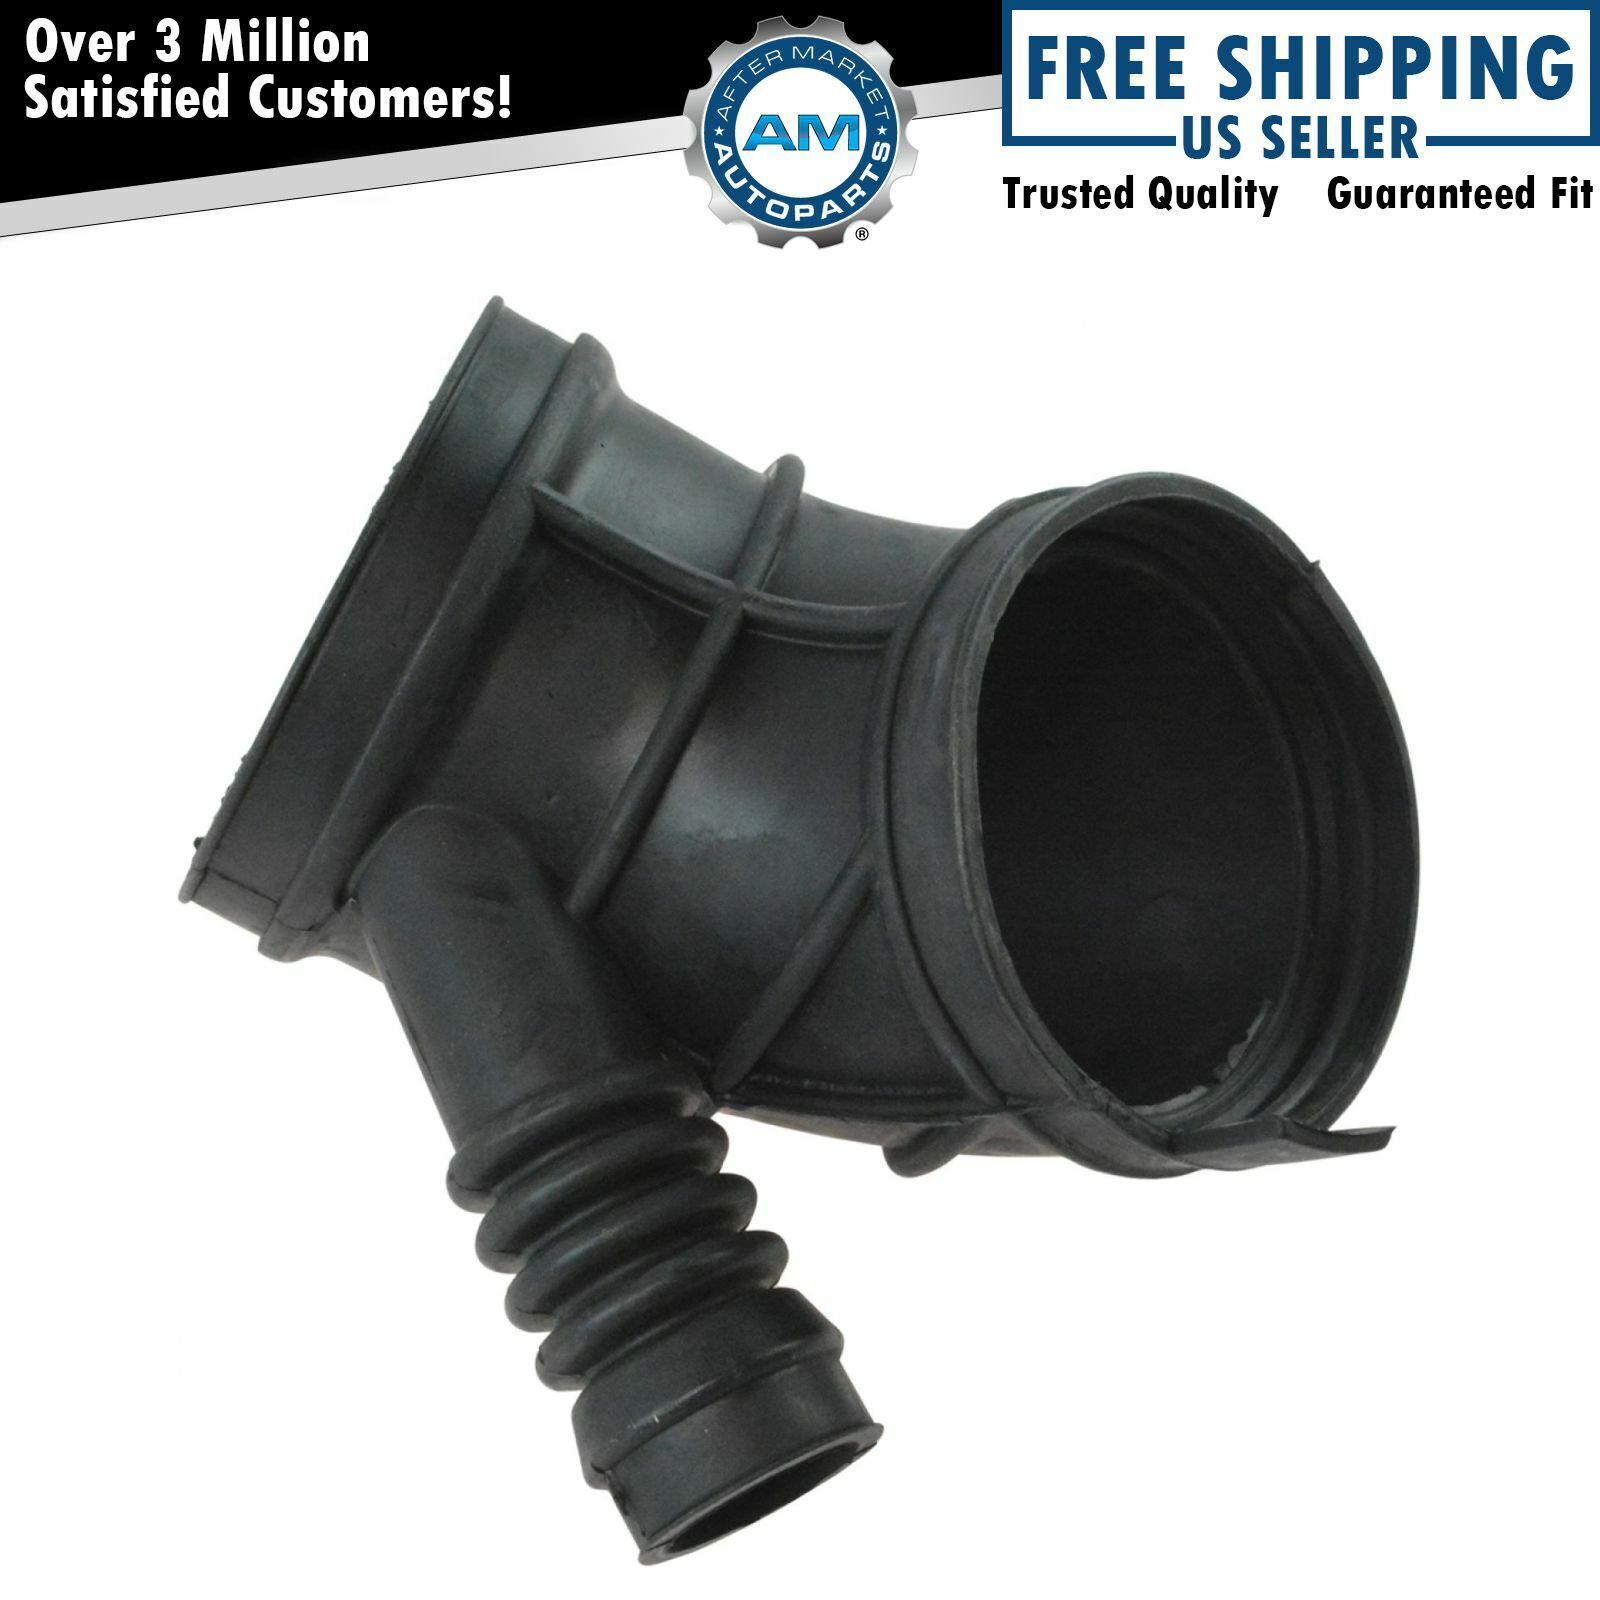 Tube Elbow Throttle Body Air Intake Boot Hose for 325Ci 325i 330CI 330i Z3